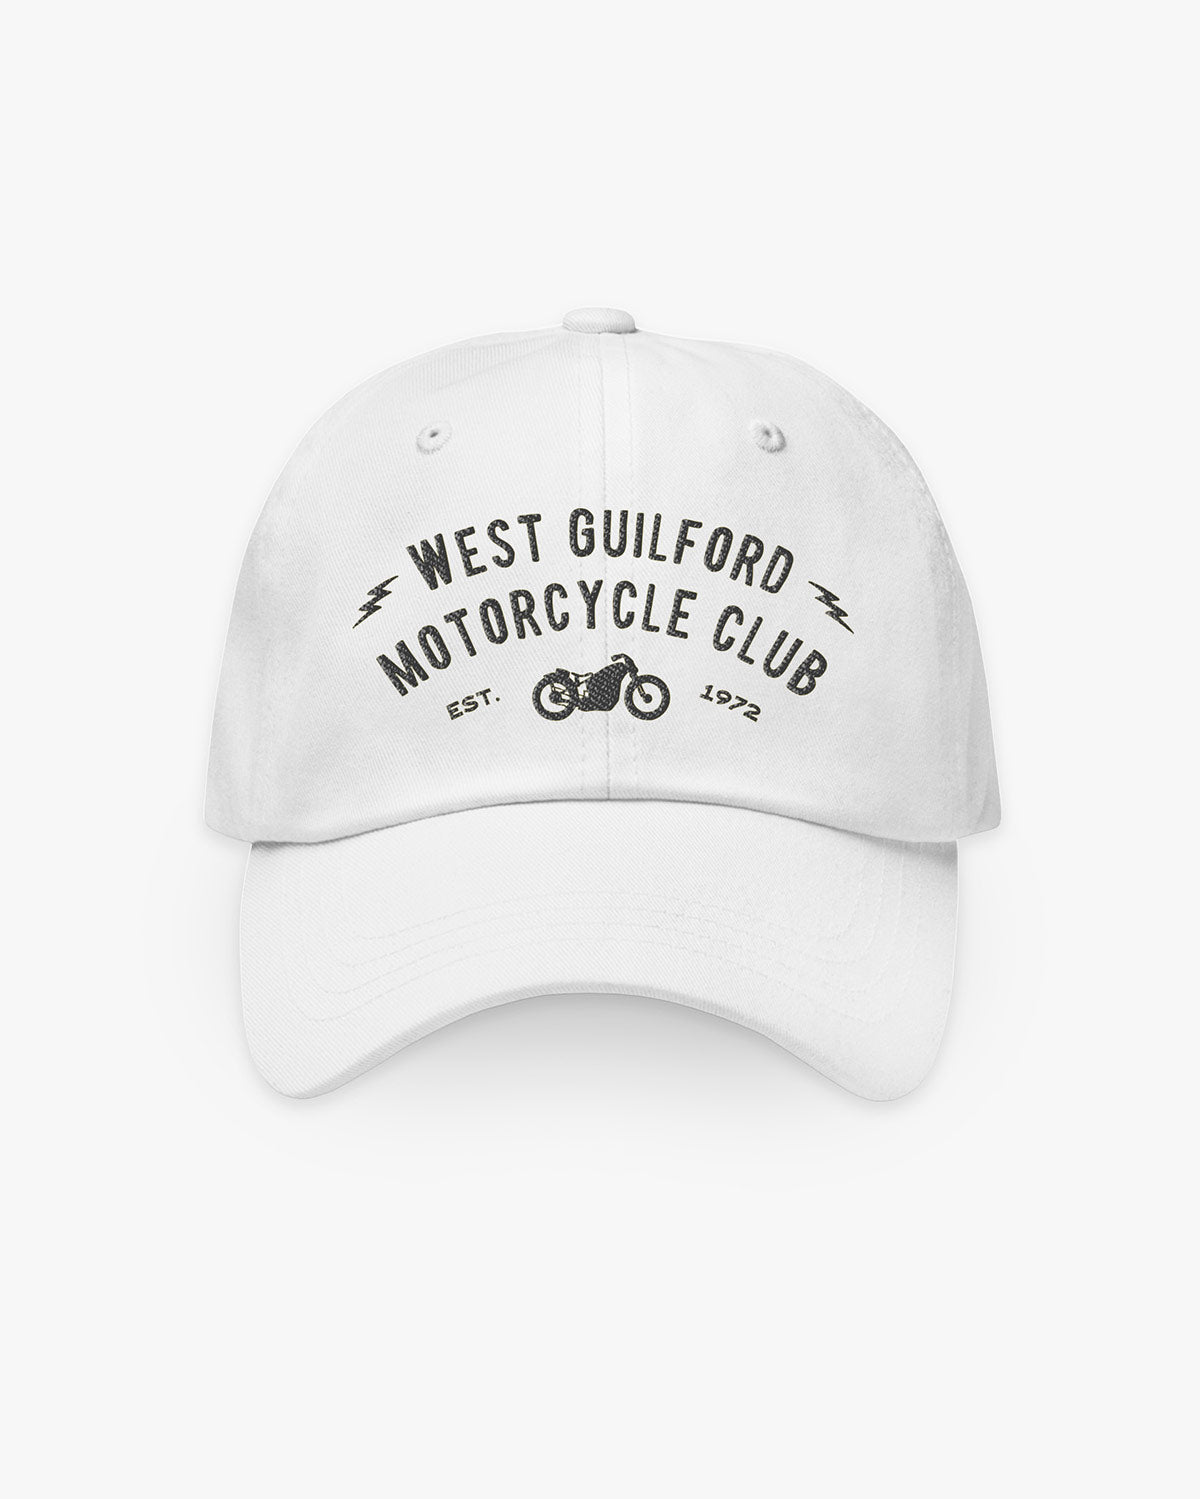 Motorcycle Club - West Guilford - Hat